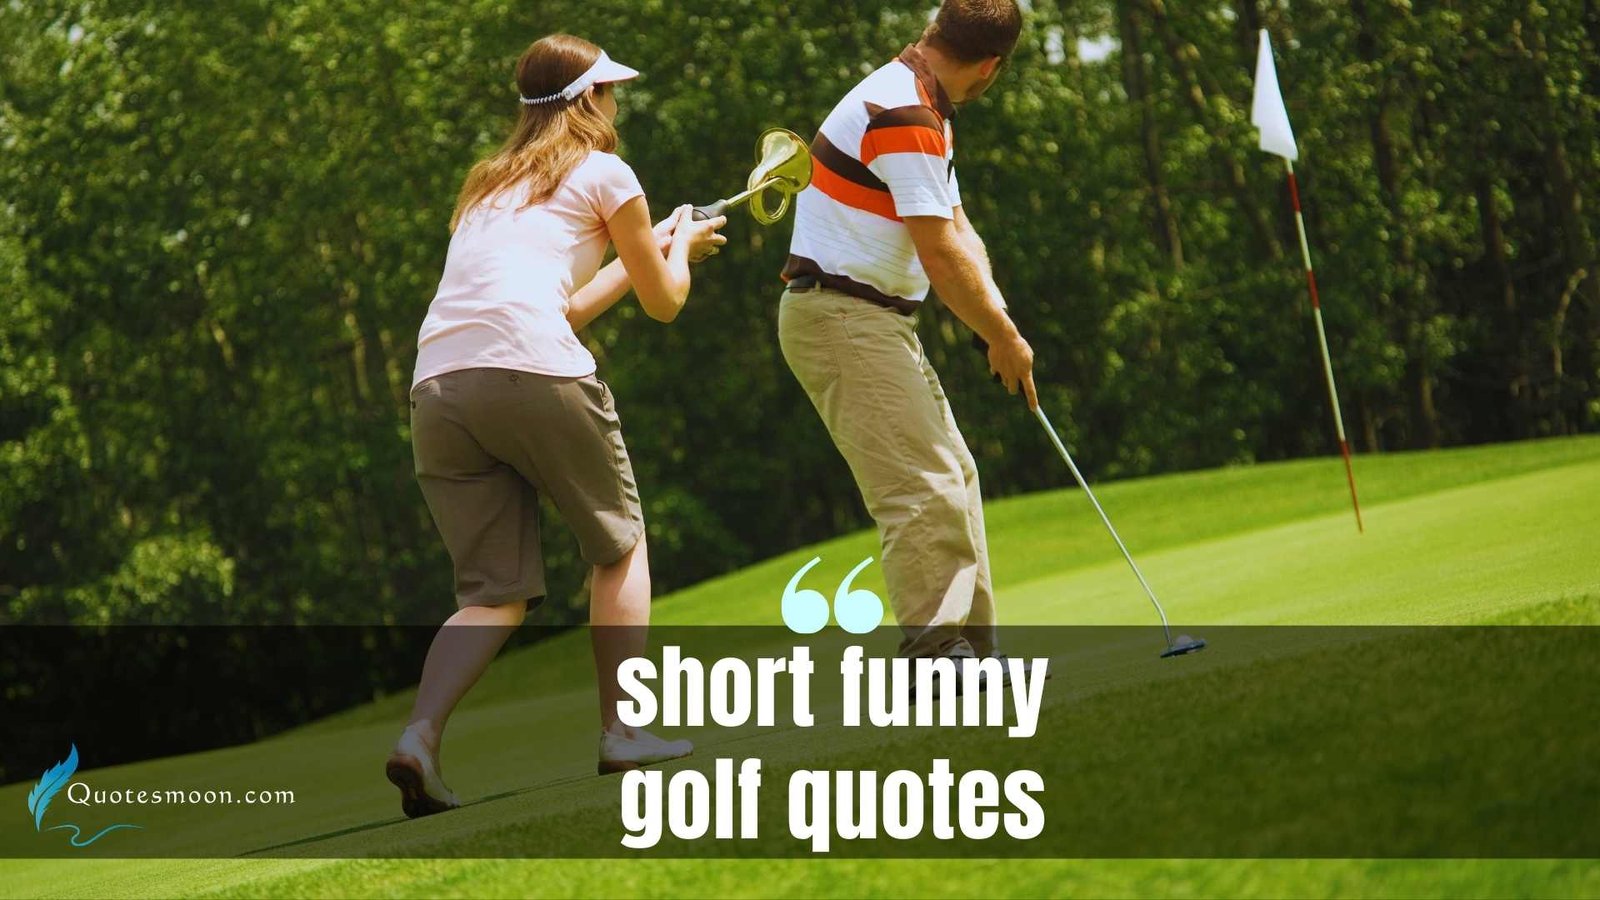 short funny golf quotes images